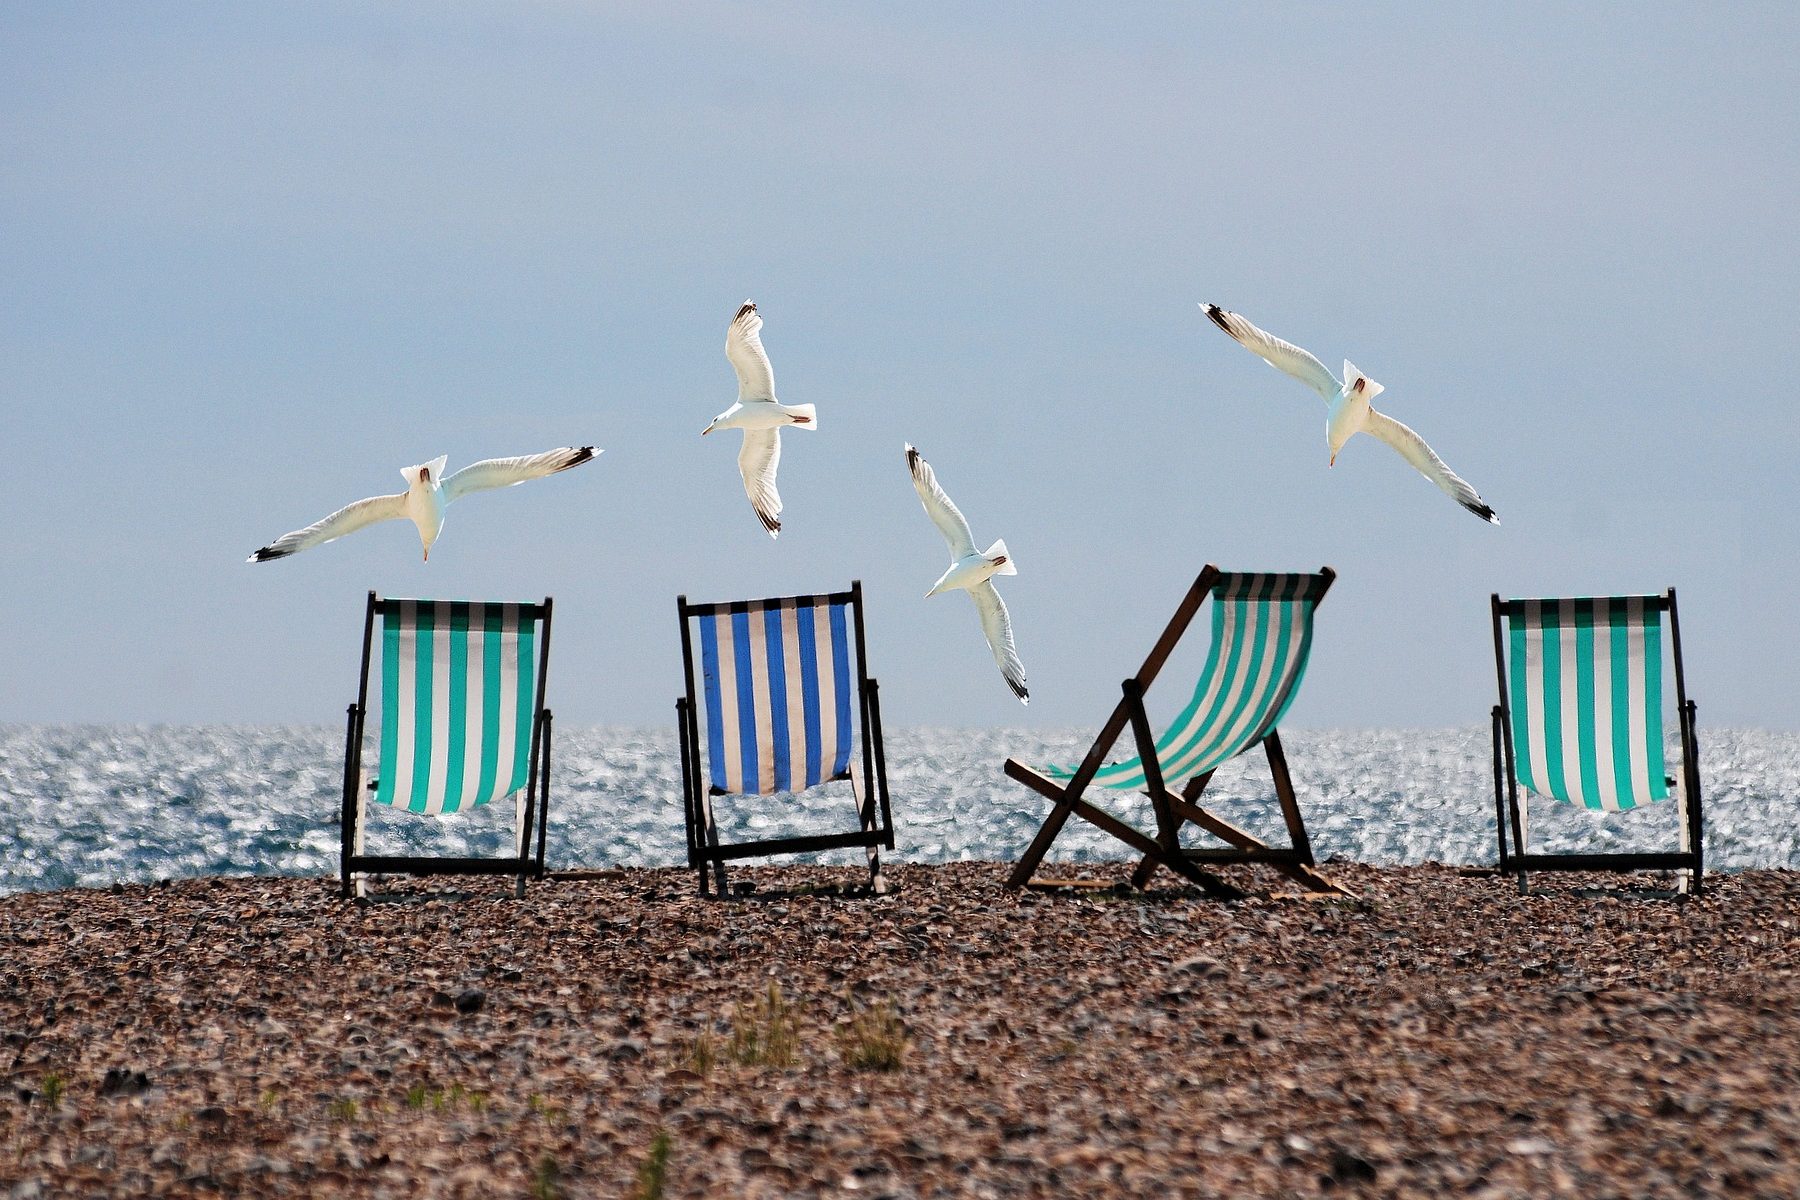 In an article about how to enjoy the holidays, four beach chairs on a beach with four white seagulls flying overhead.